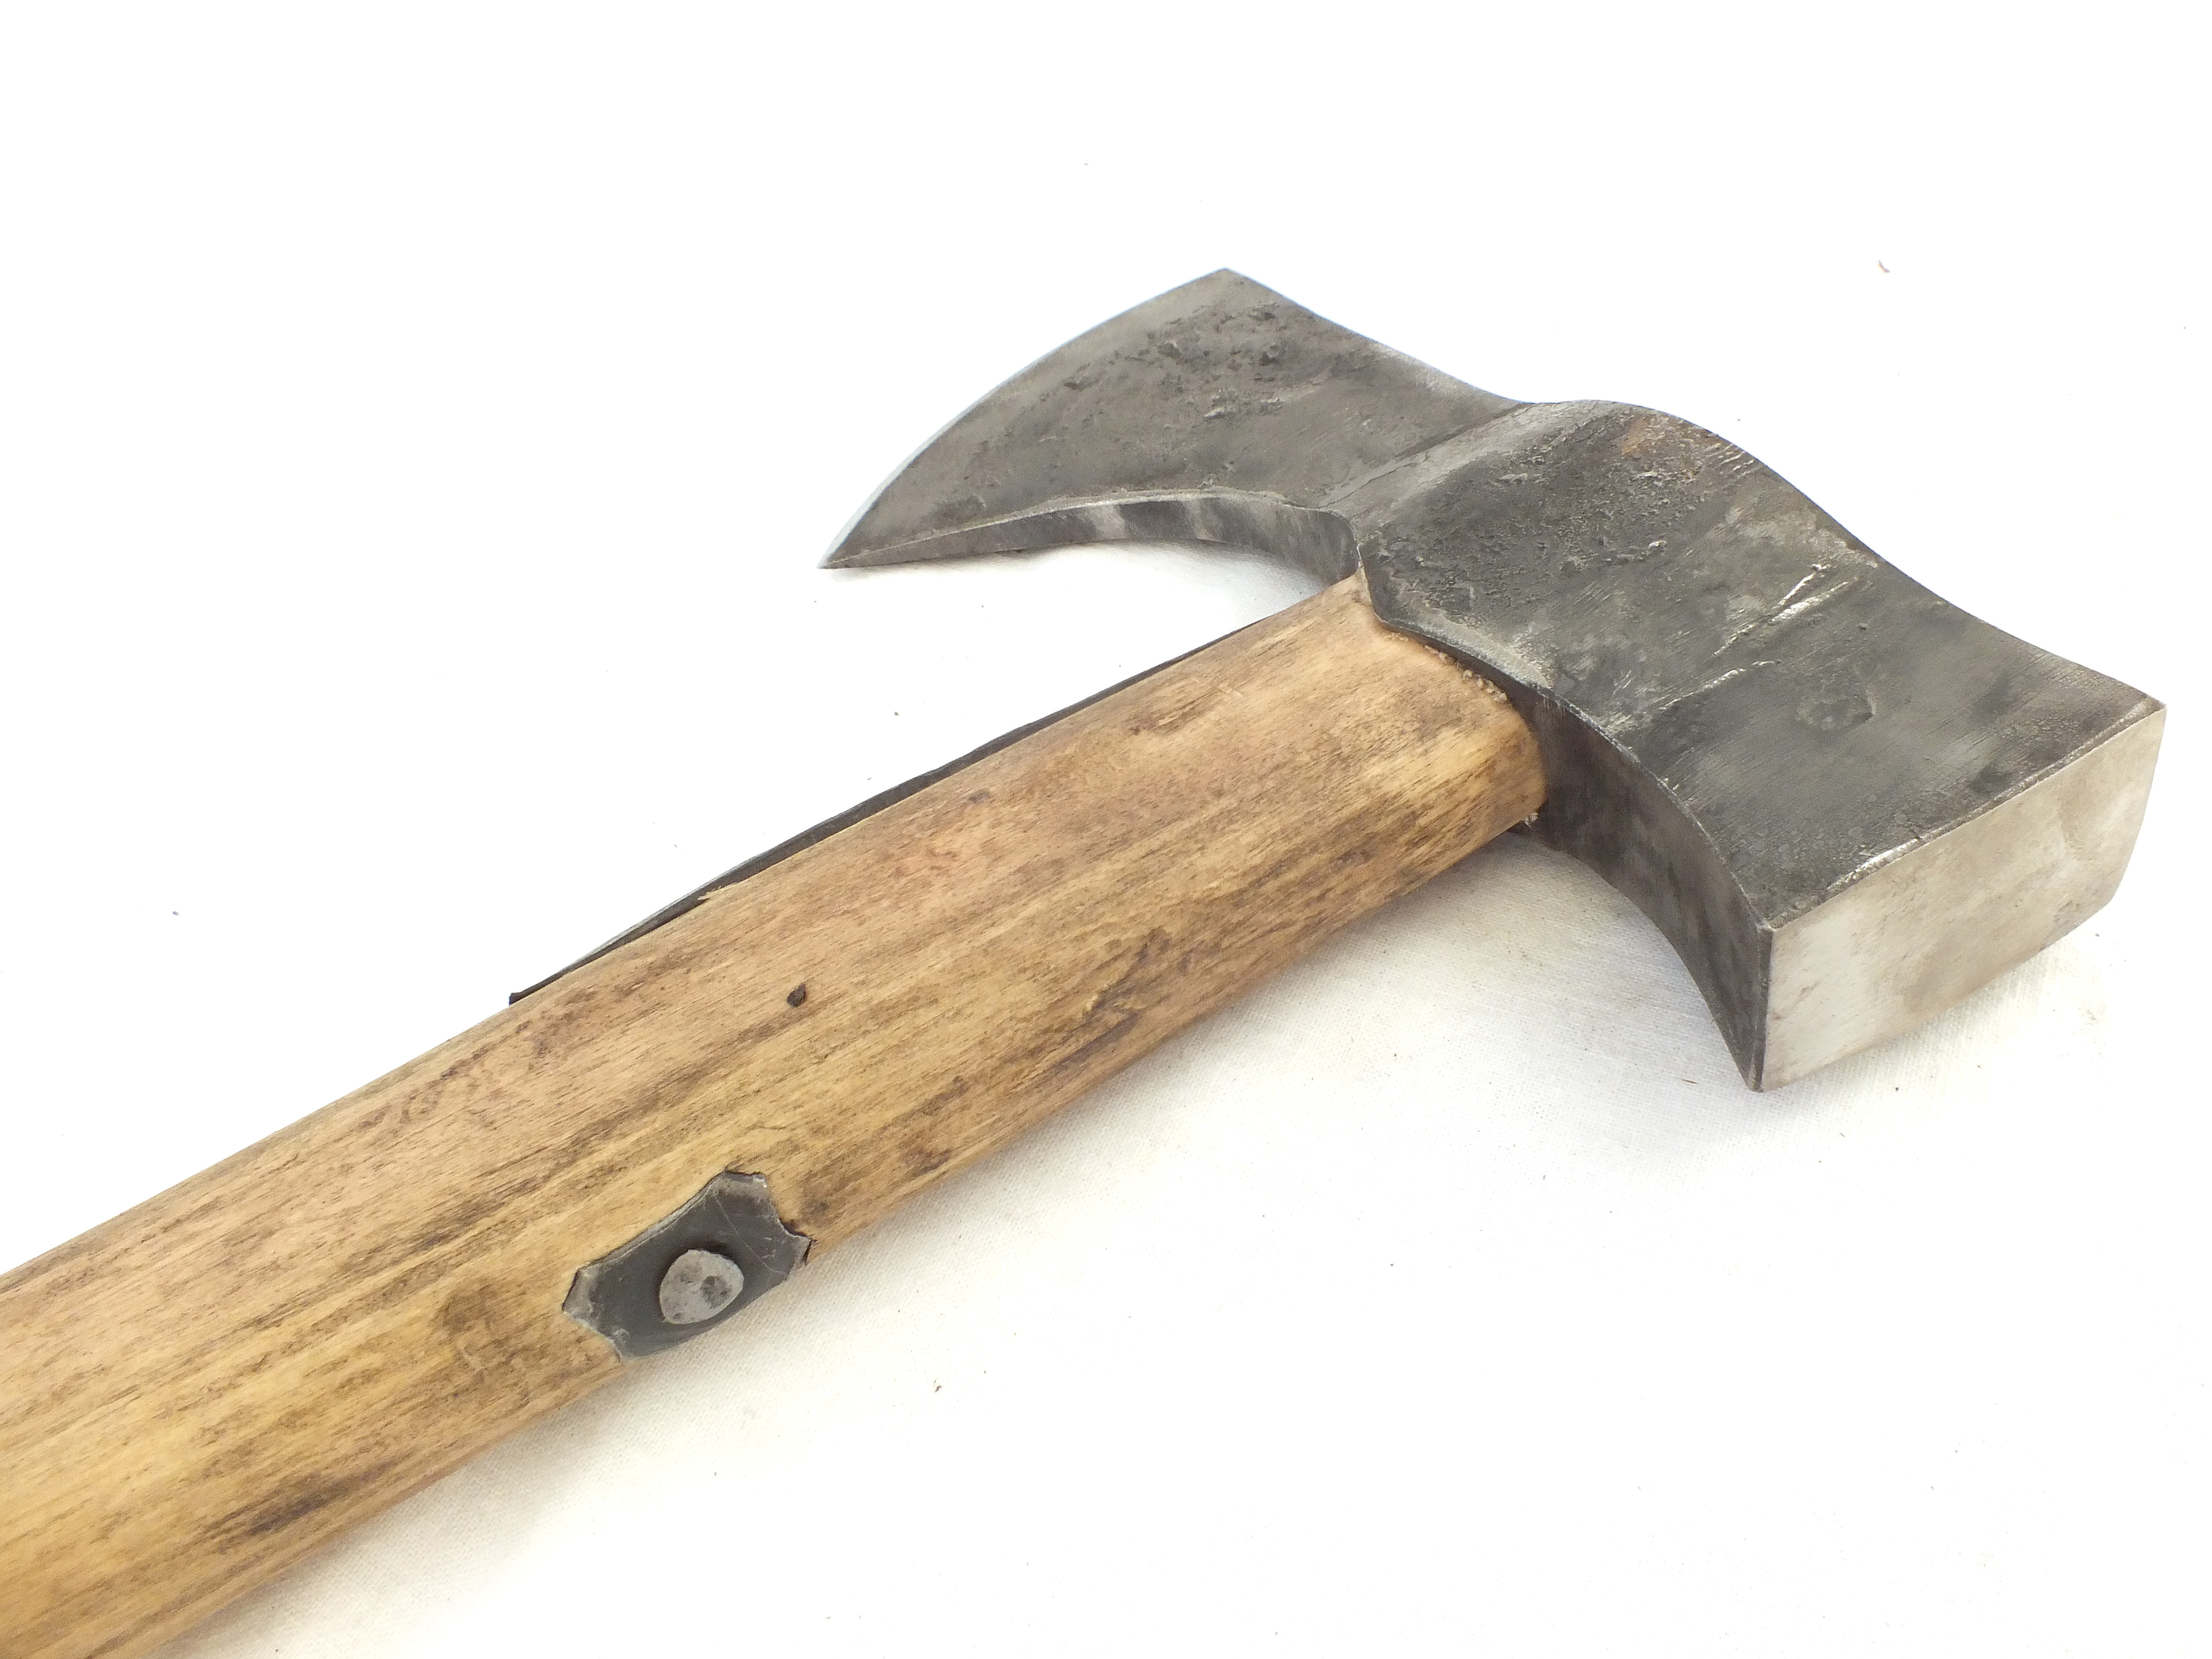 BN_06a - Kitchen AXE or Light Woodworking AXE with Hand Carved Dogwood  Handle (Small Viking Broad AXE) - Adithiel